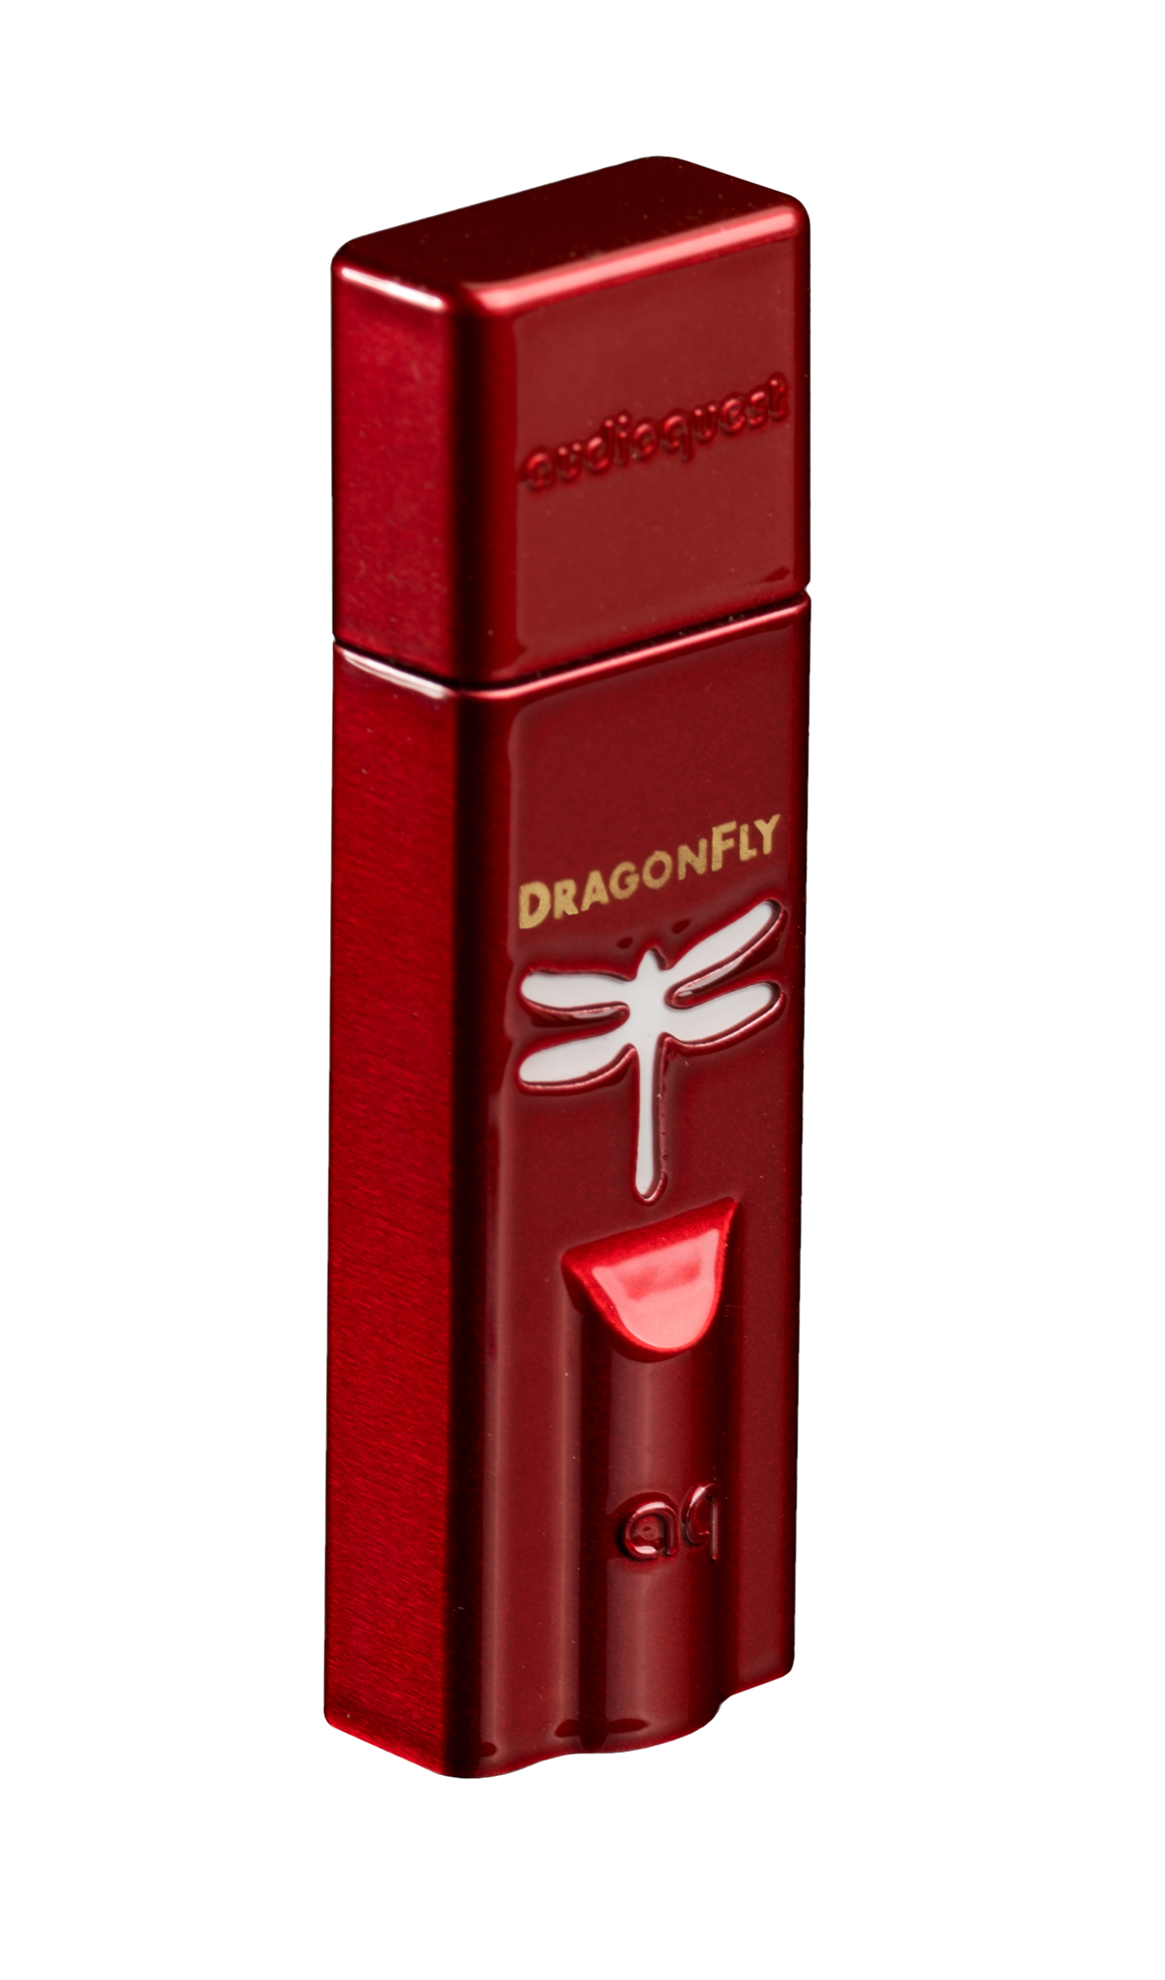 Dragonfly red DAC, Preamp & Headphone Amp. Output 2.1v